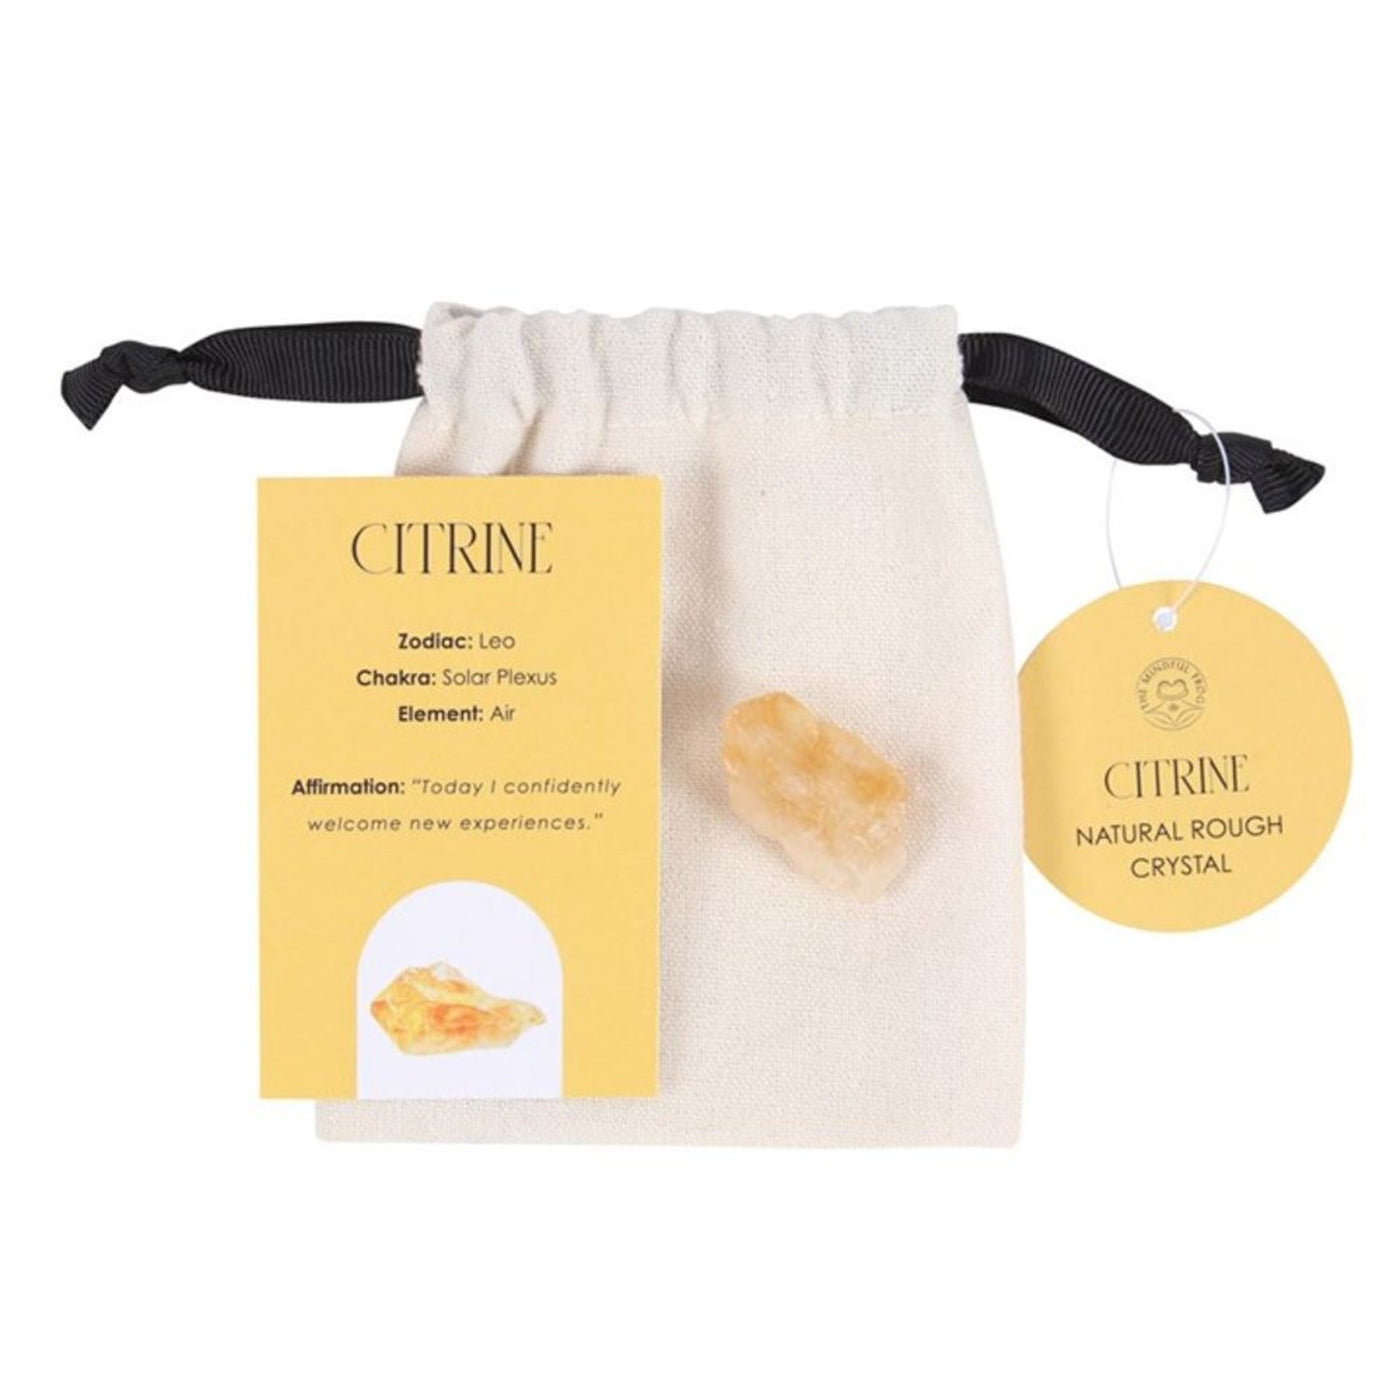 Citrine Healing Rough Natural Crystal With Storage Pouch.